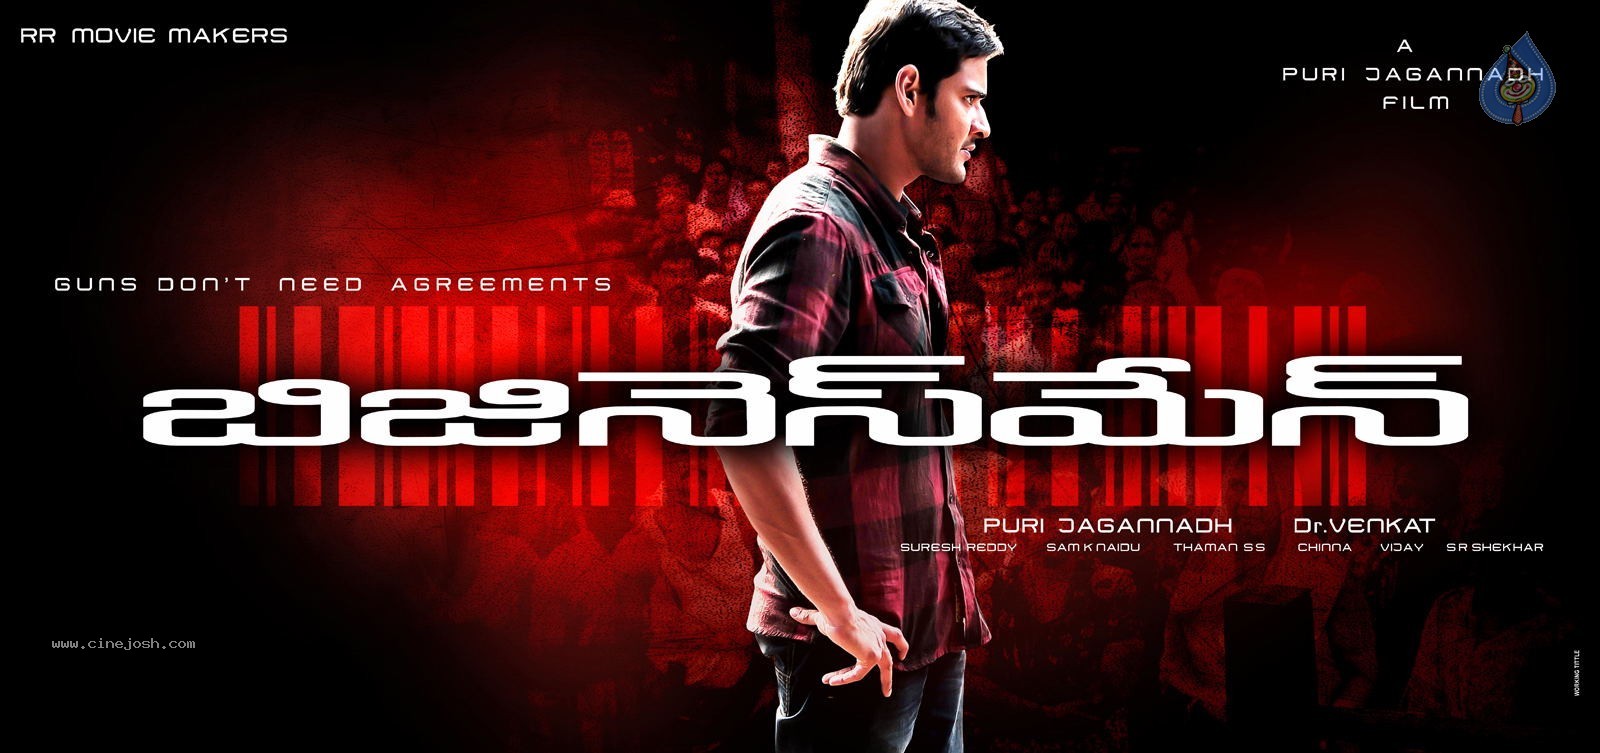 Businessman Movie Wallpapers - Photo 8 of 9